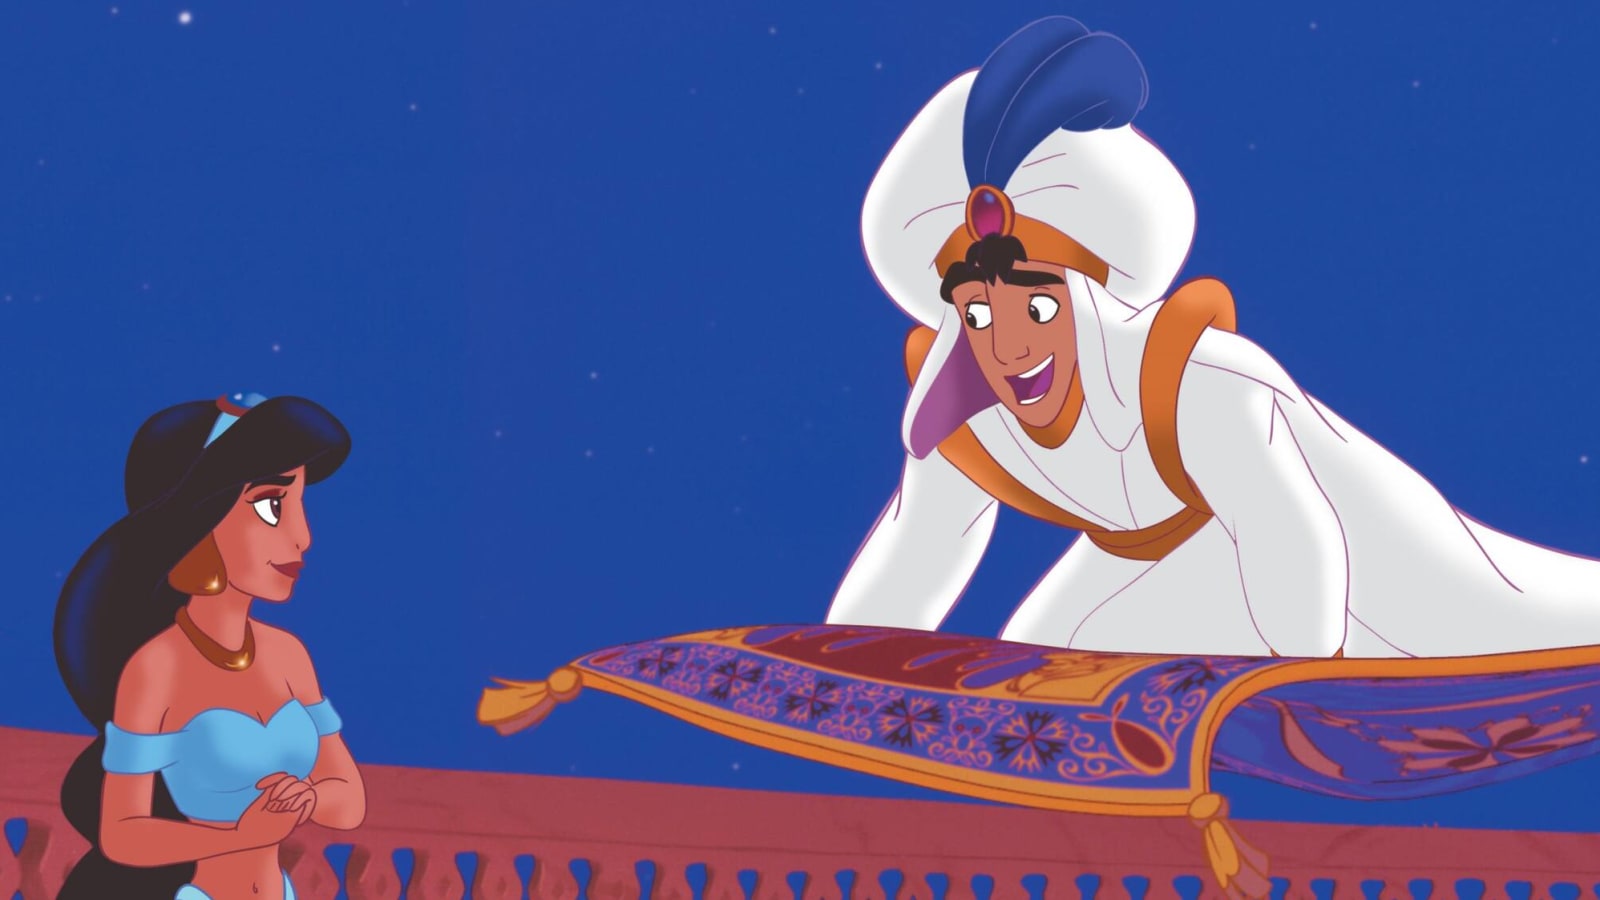 20 facts you might not know about 'Aladdin'